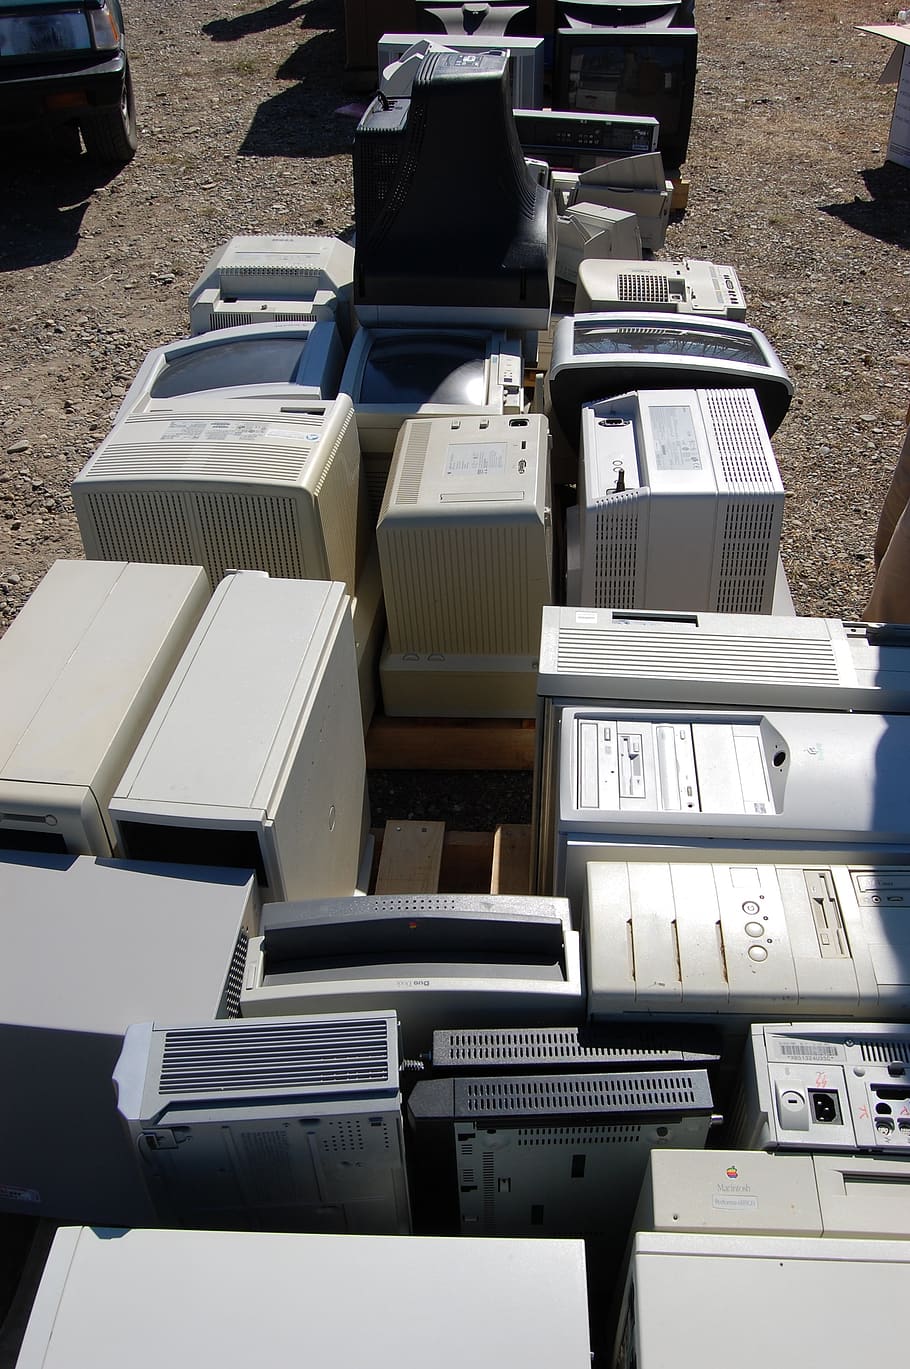 e-waste, computers, electronics, technology, obsolete, pile, recycling, large group of objects, stack, sunlight